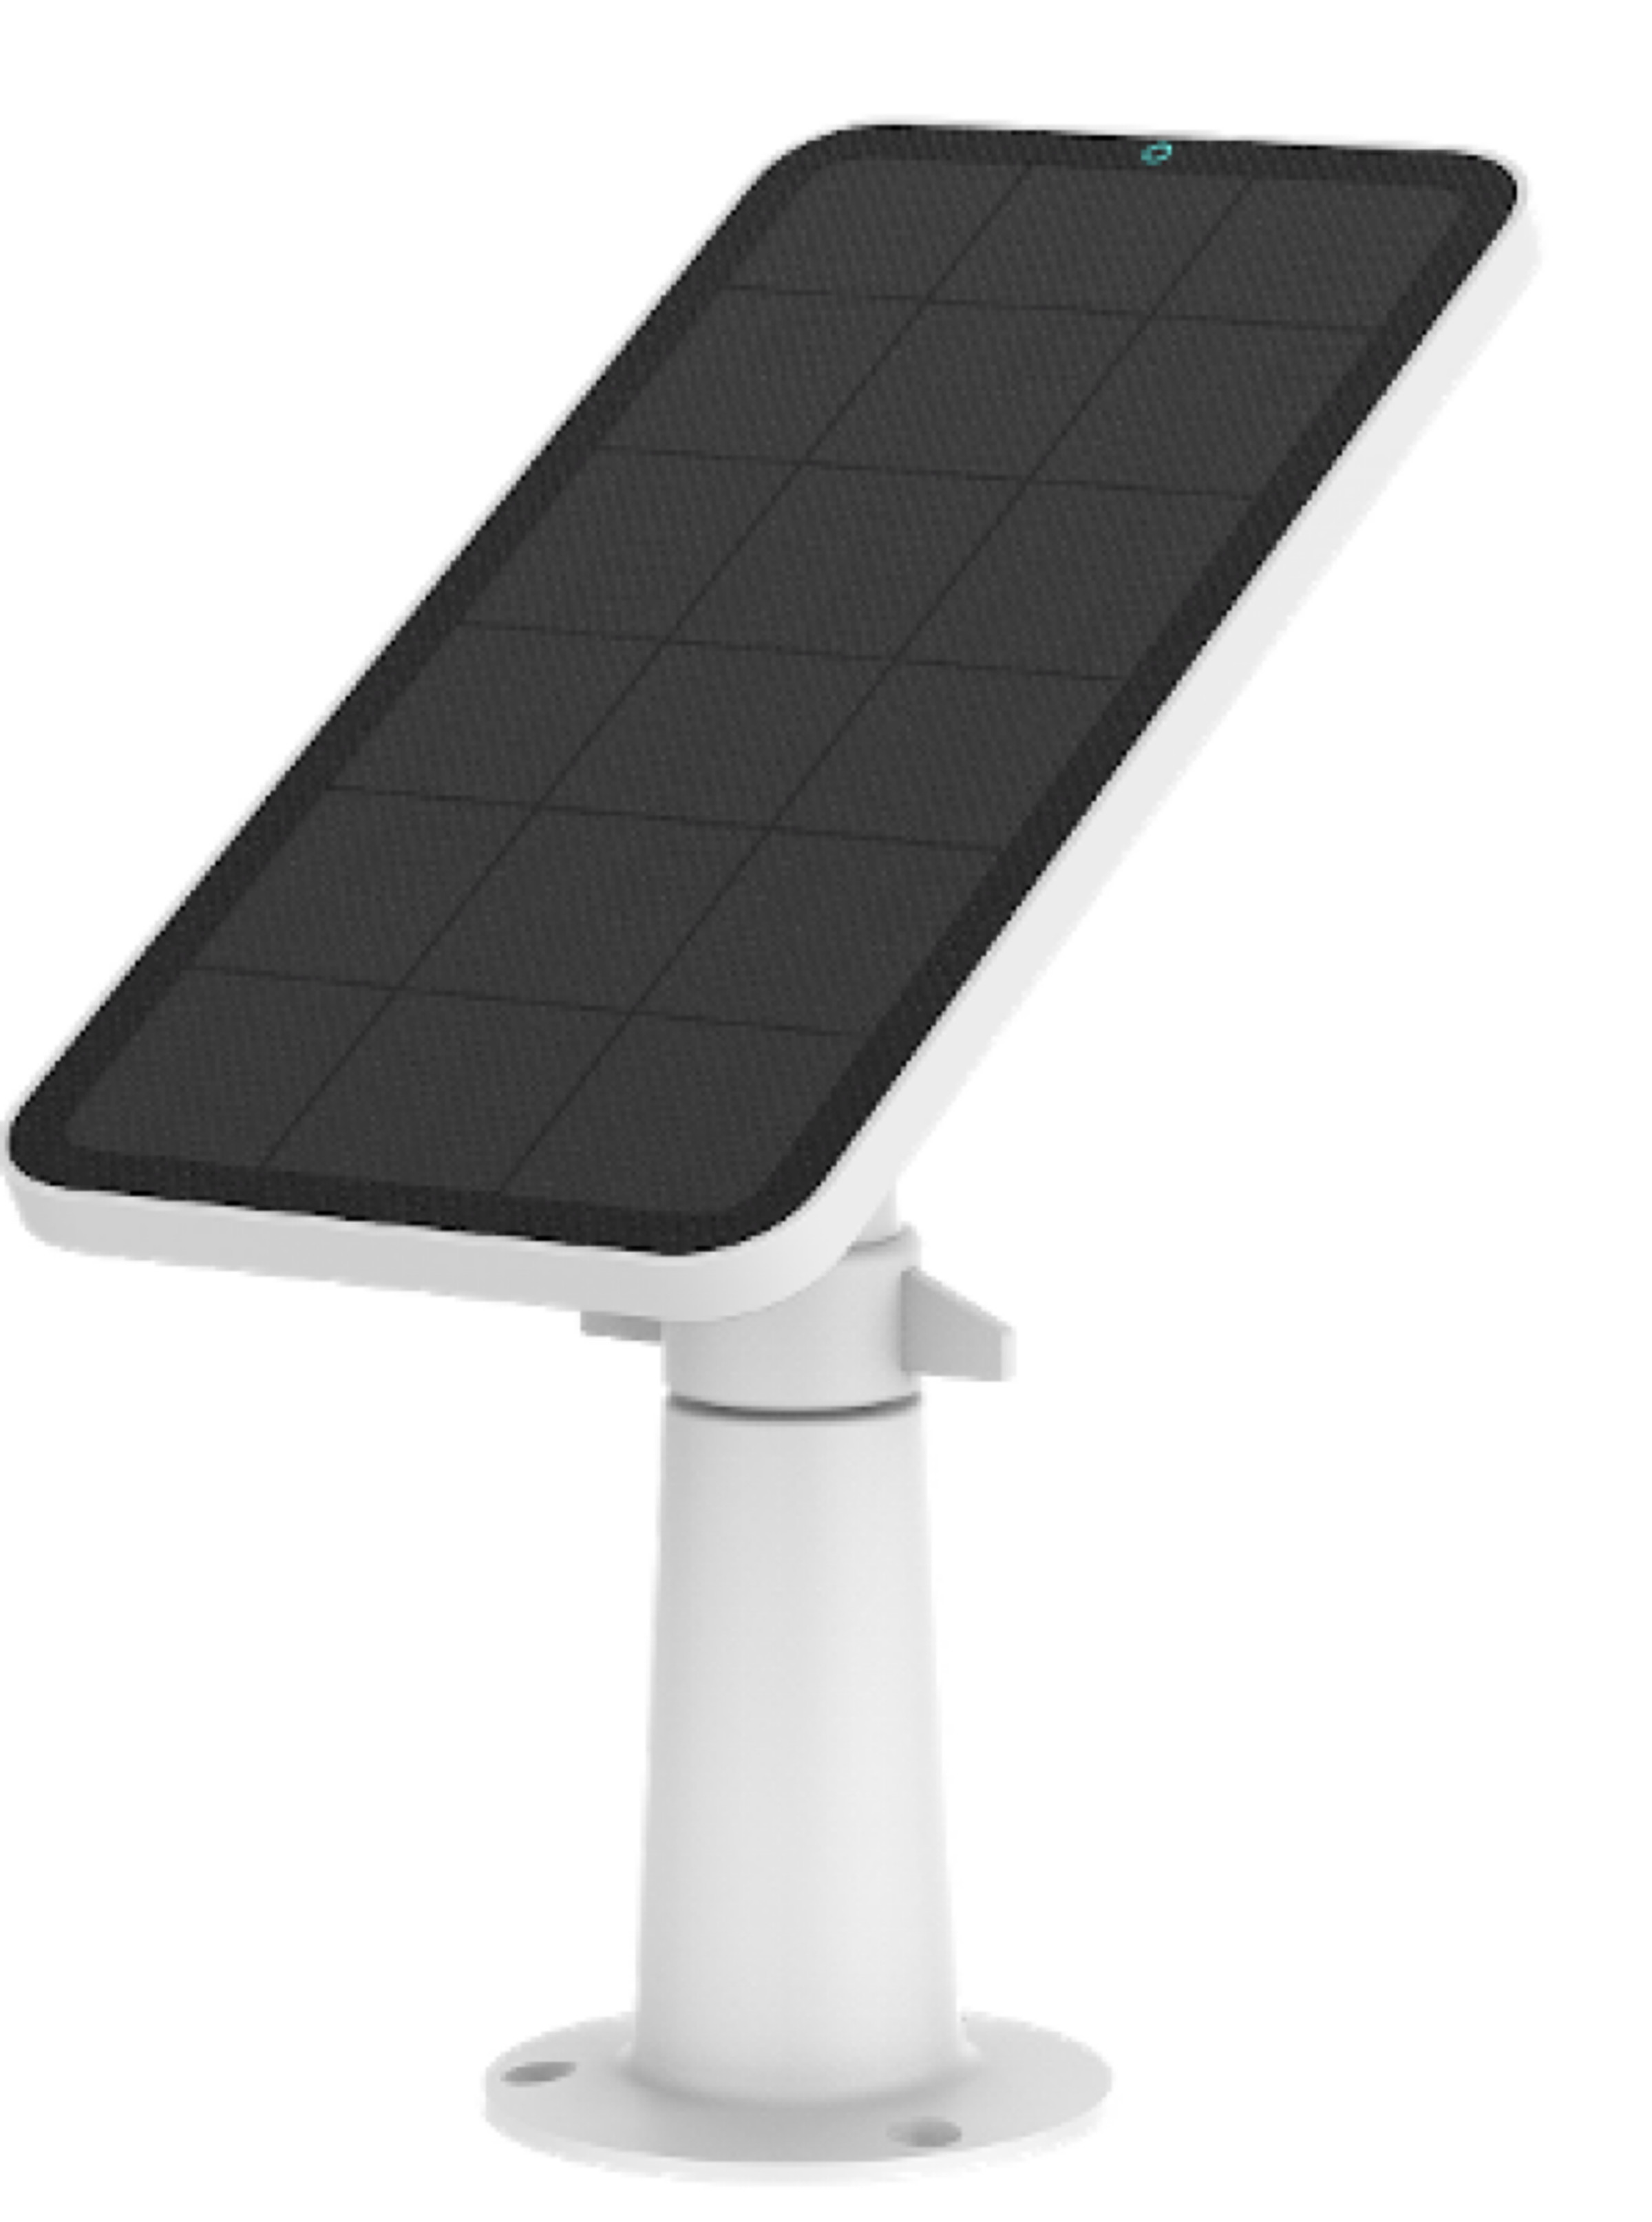 A $20 solar panel can be added to the 4G Starlight camera for continuous power.